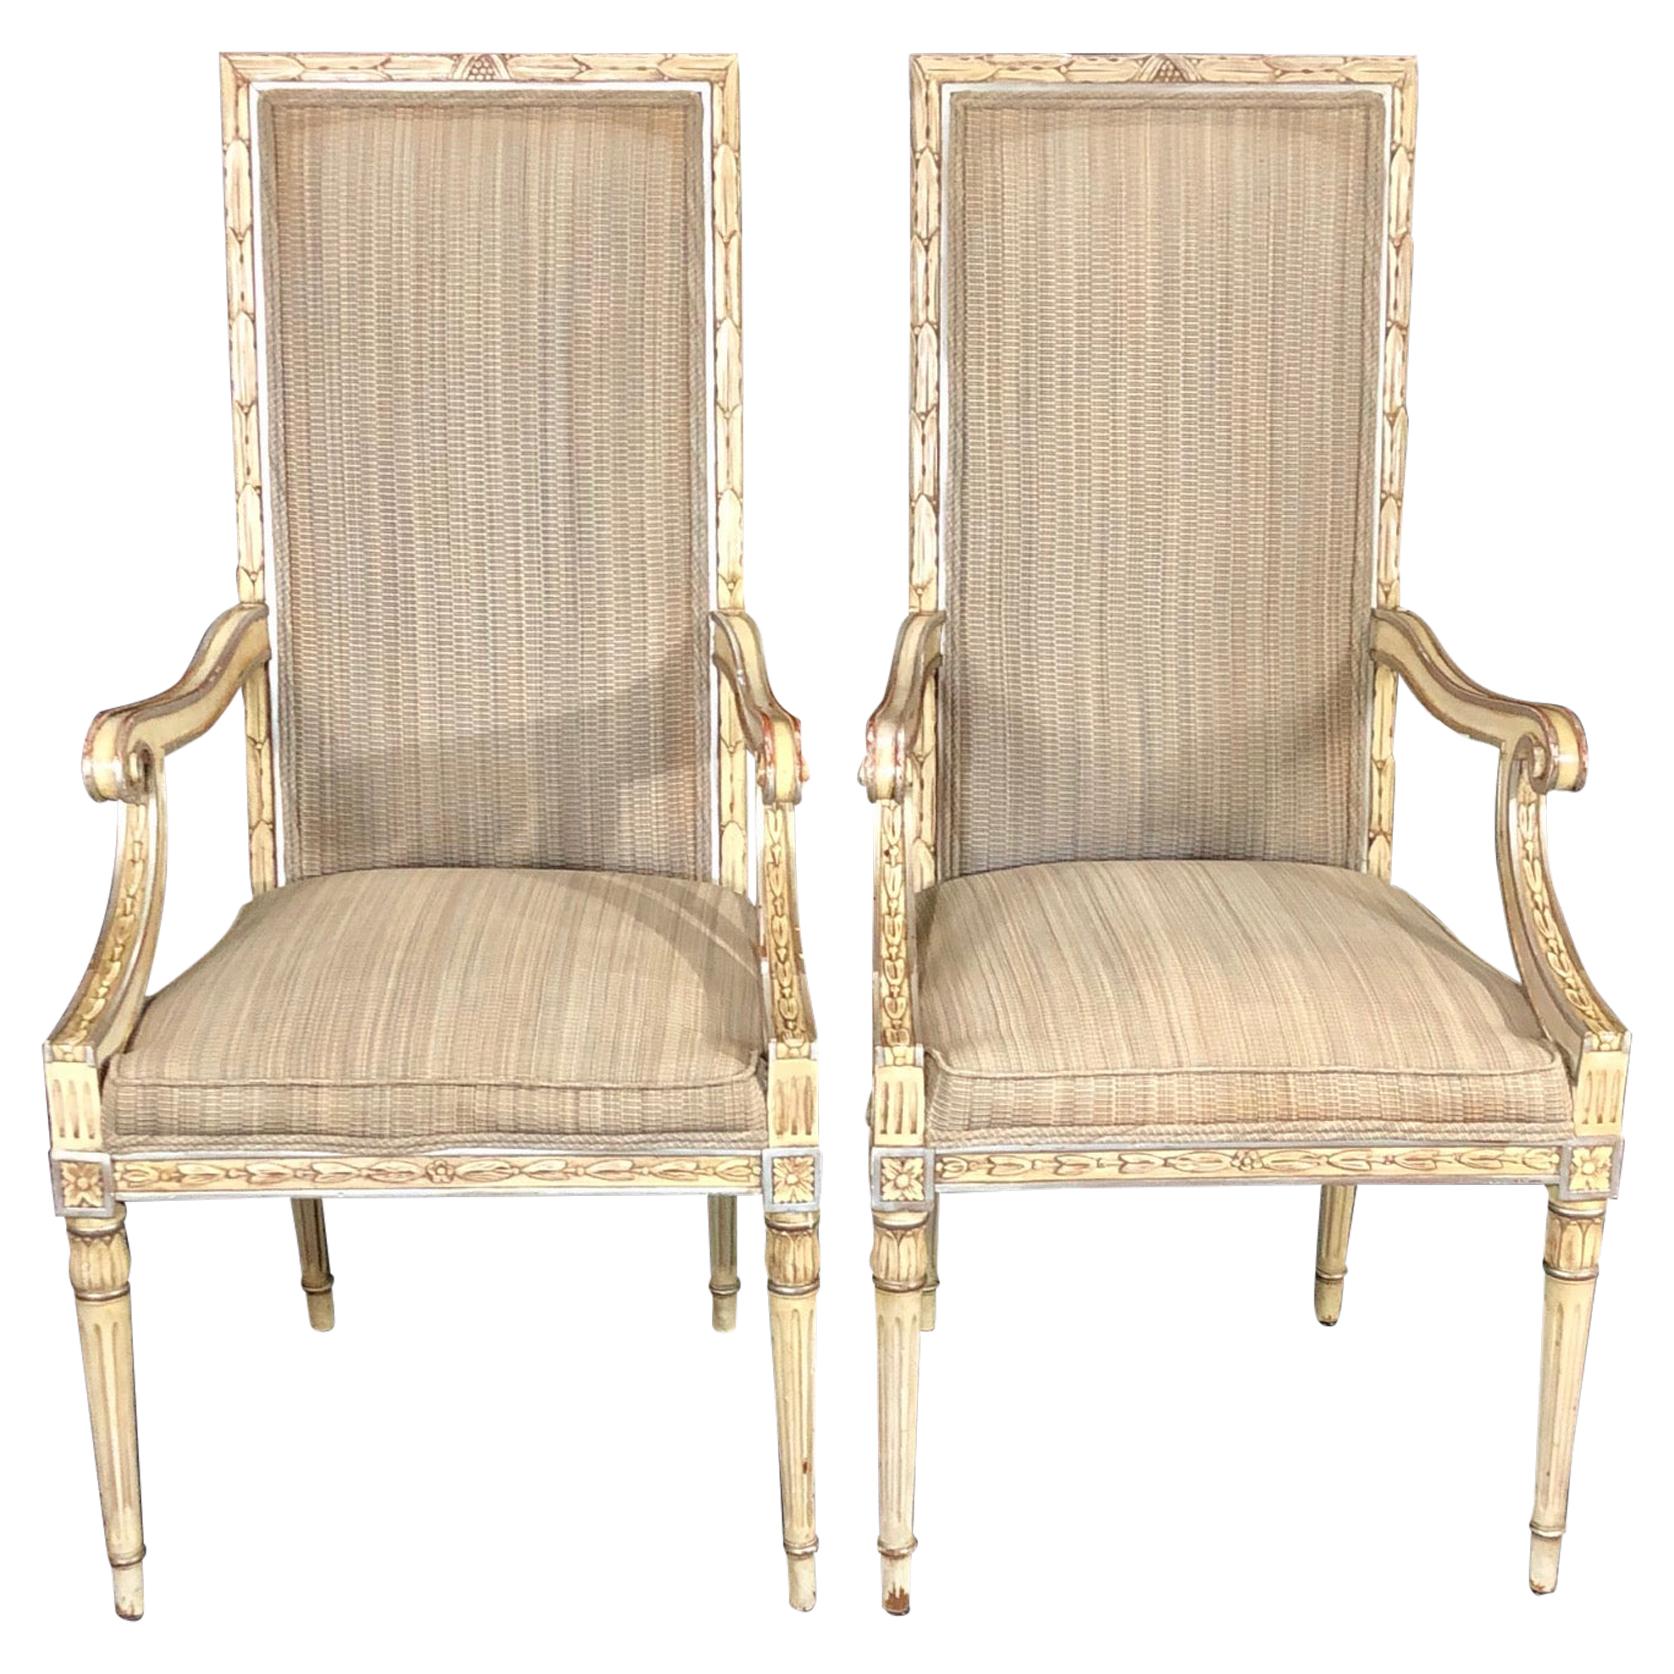 Stunning Pair of Louis XVI Style Painted and Upholstered Neoclassical Armchairs